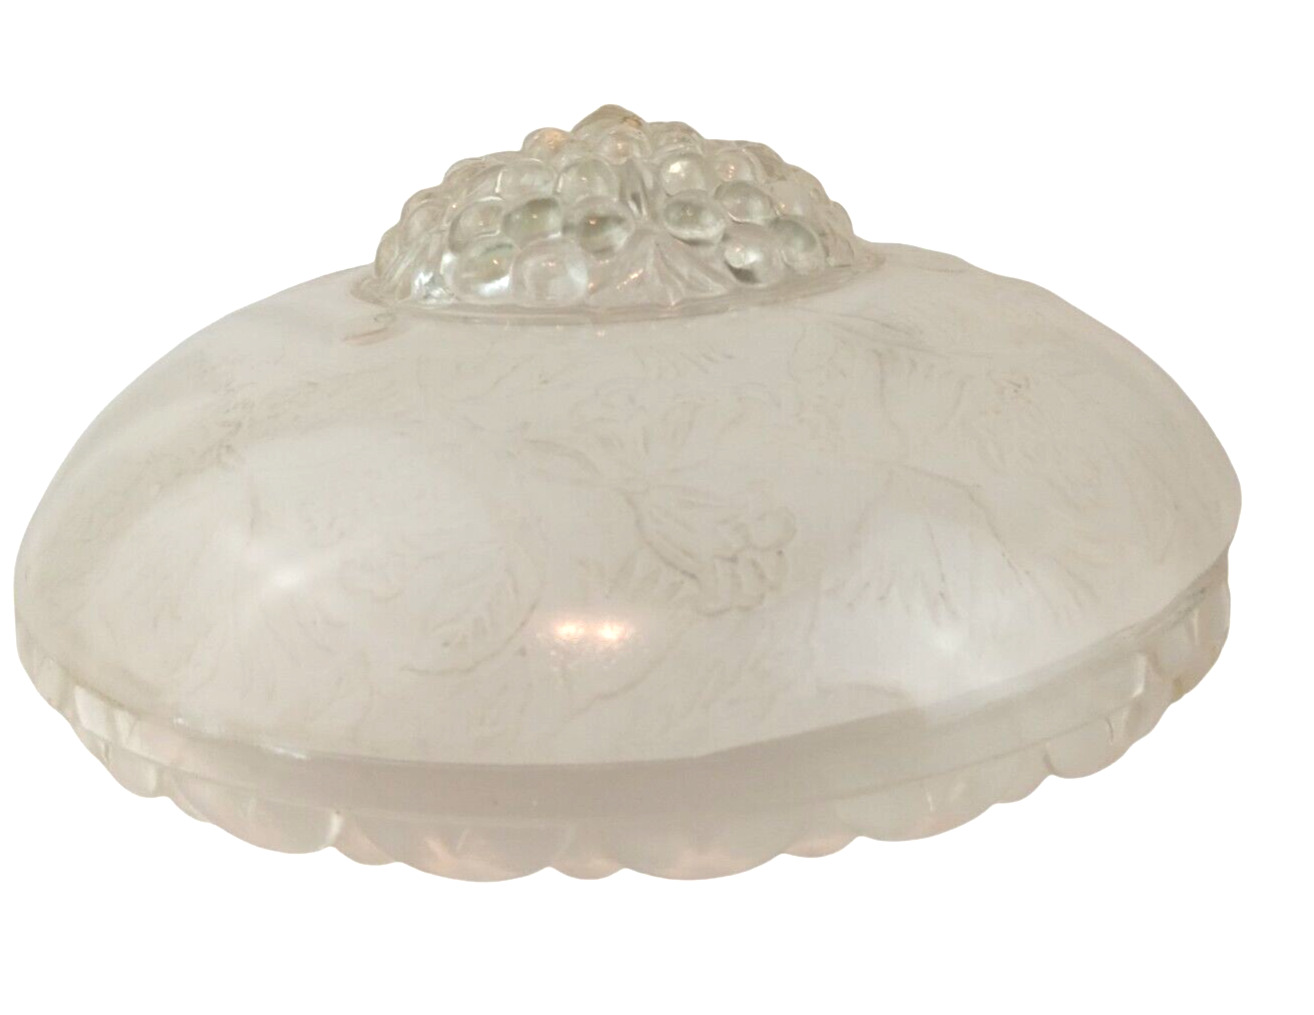 Original Art Deco Ceiling Light Shade Cover 3 Hole Frosted Clear Bubble Glass